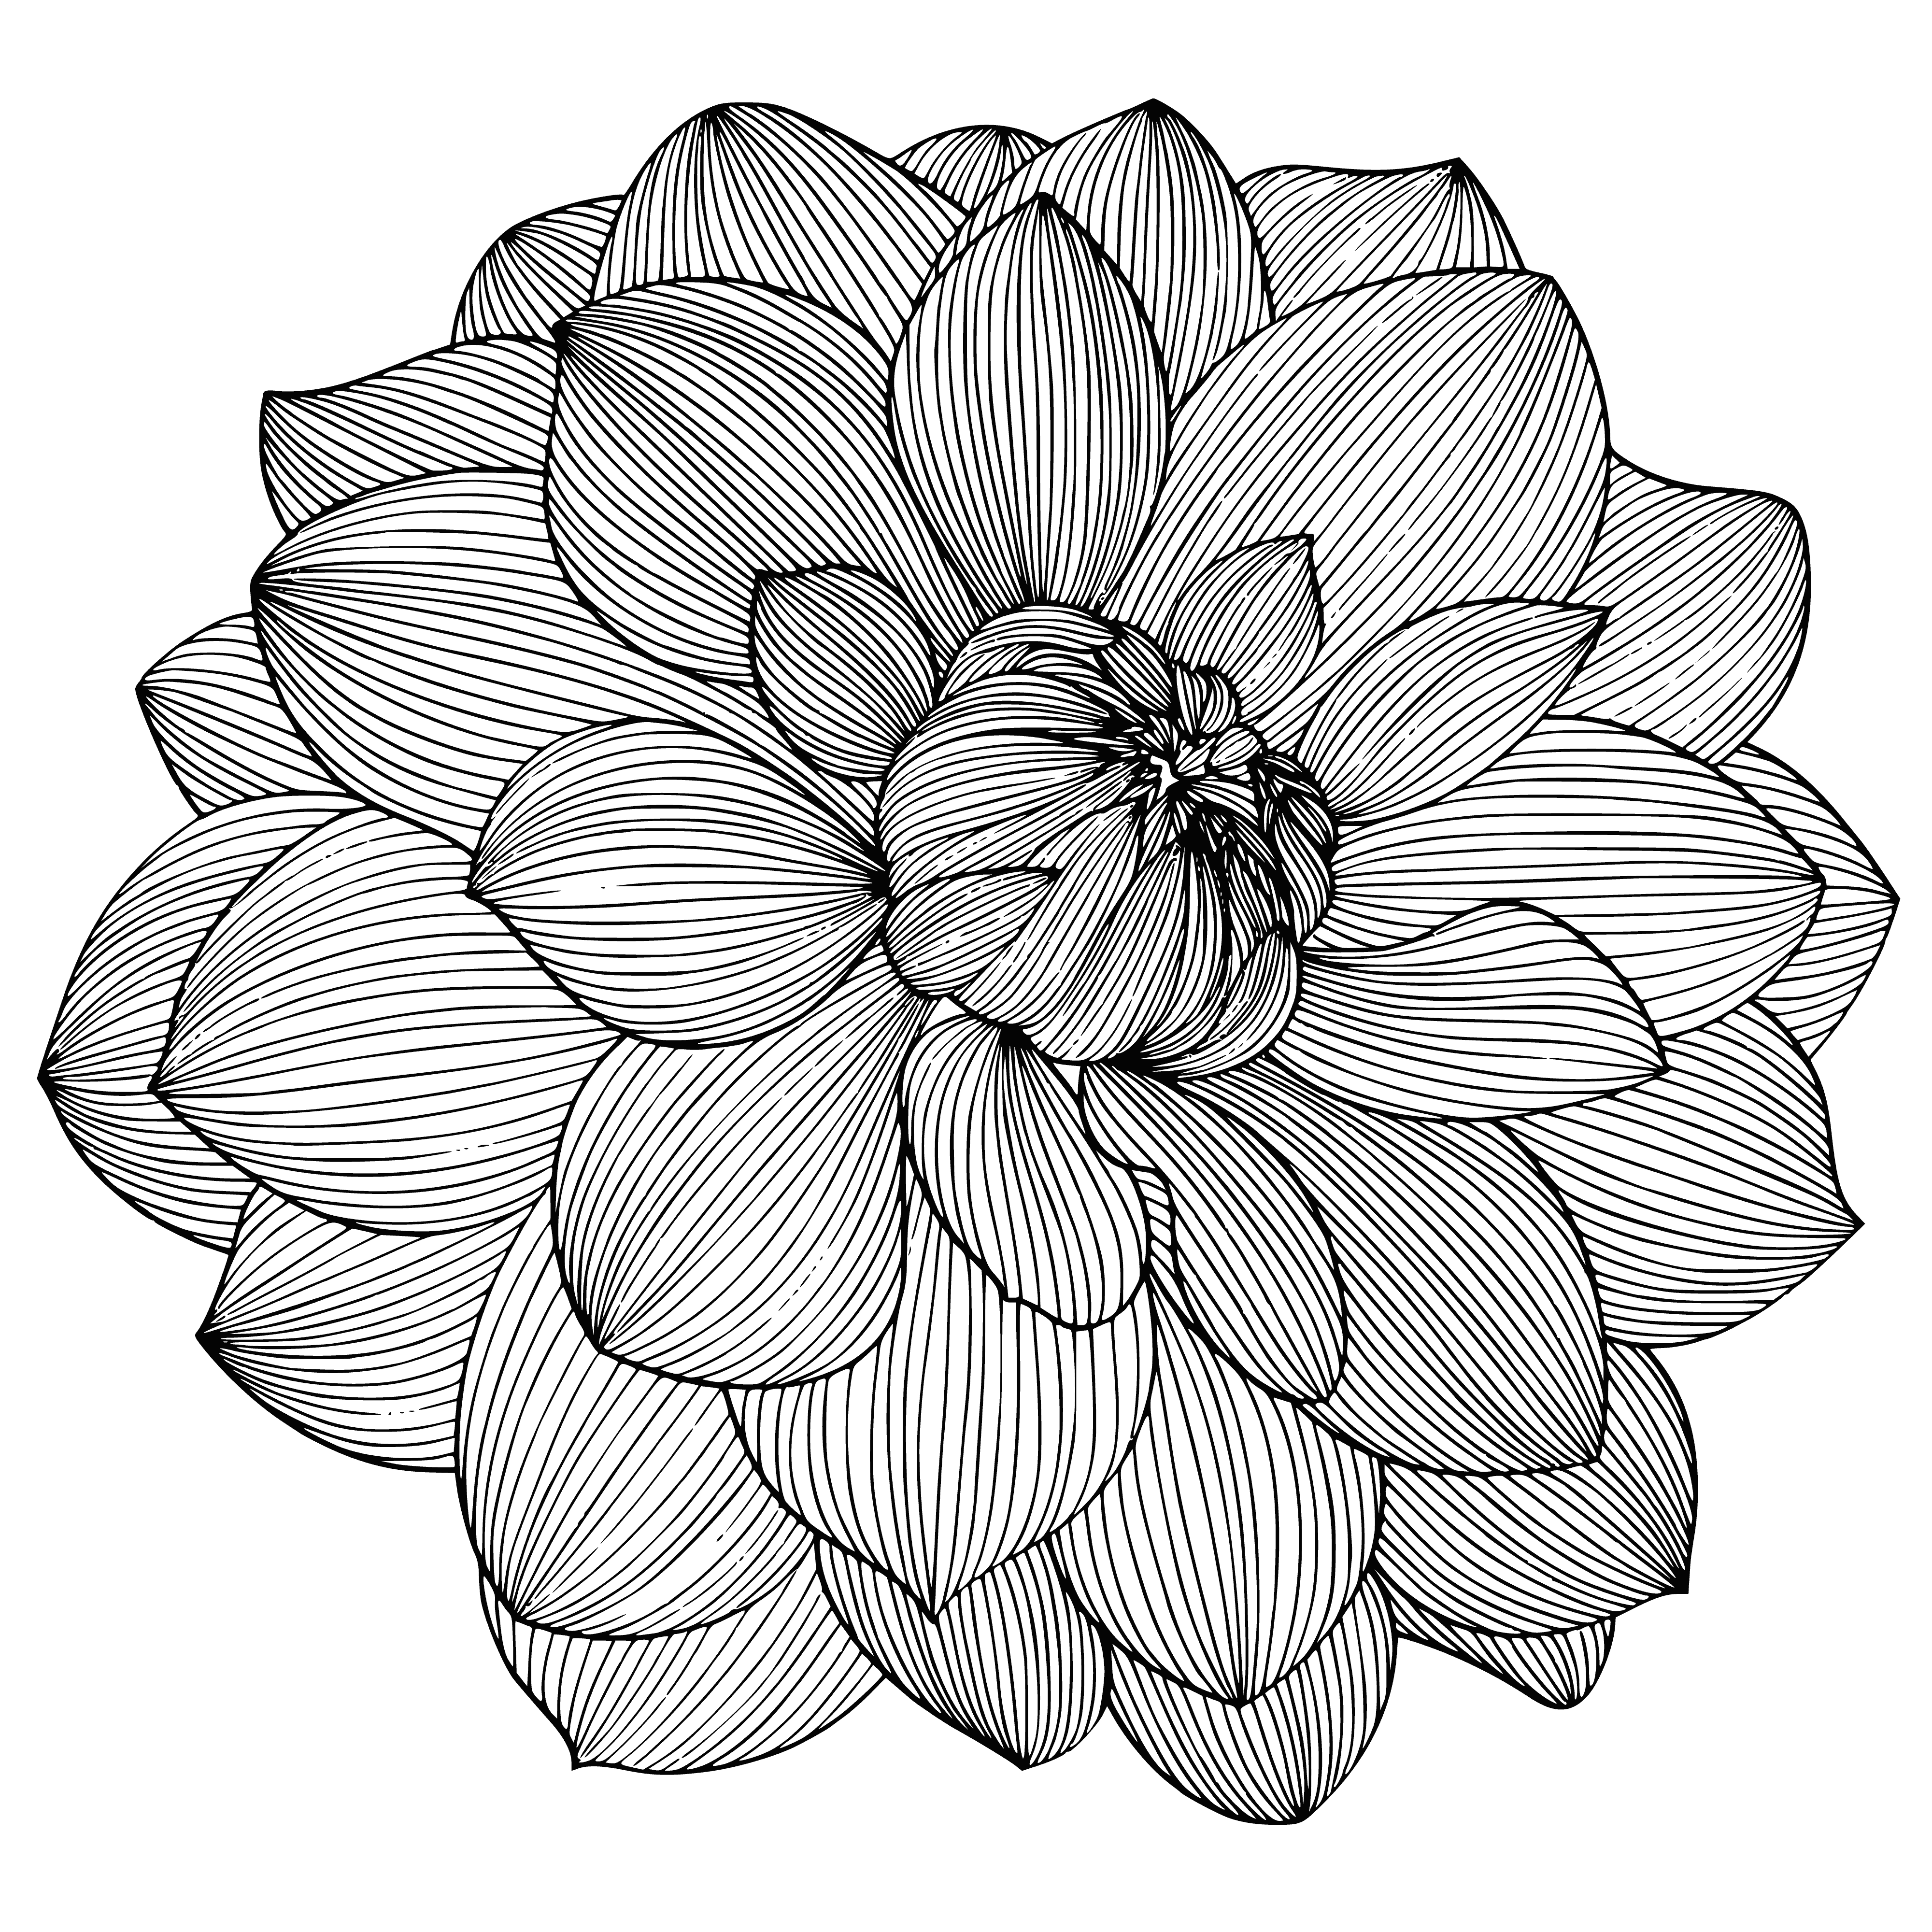 coloring page: Beautiful flower coloring page with pink petals, white center, green stem, and leaves.